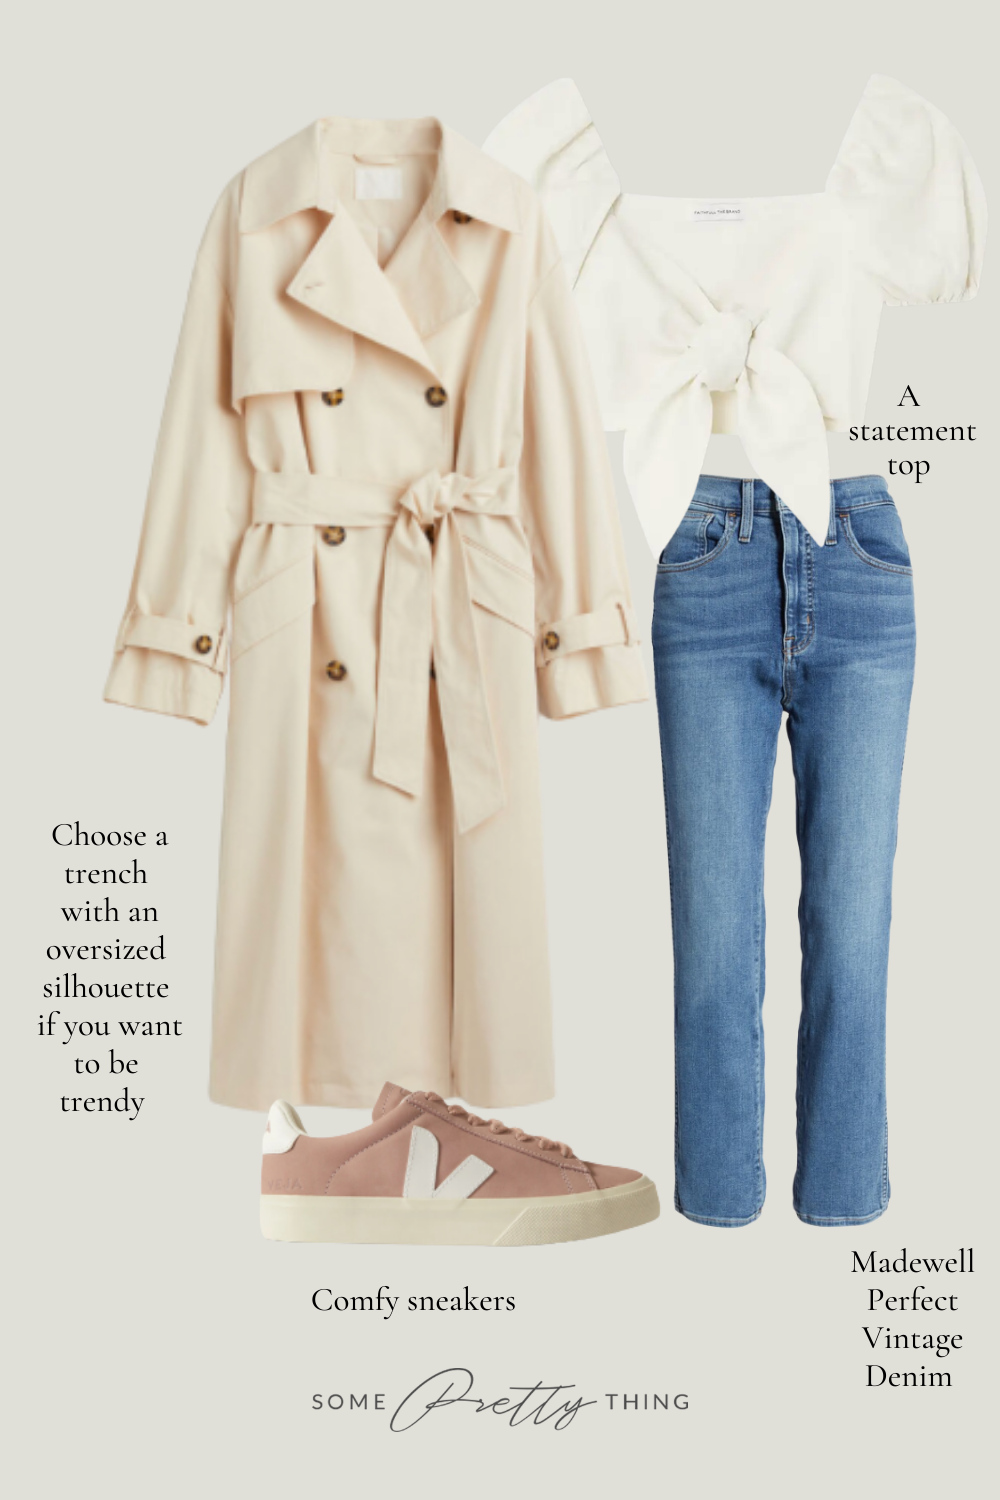 Choose a trench with an oversized silhouette if you want to be slightly more trendy